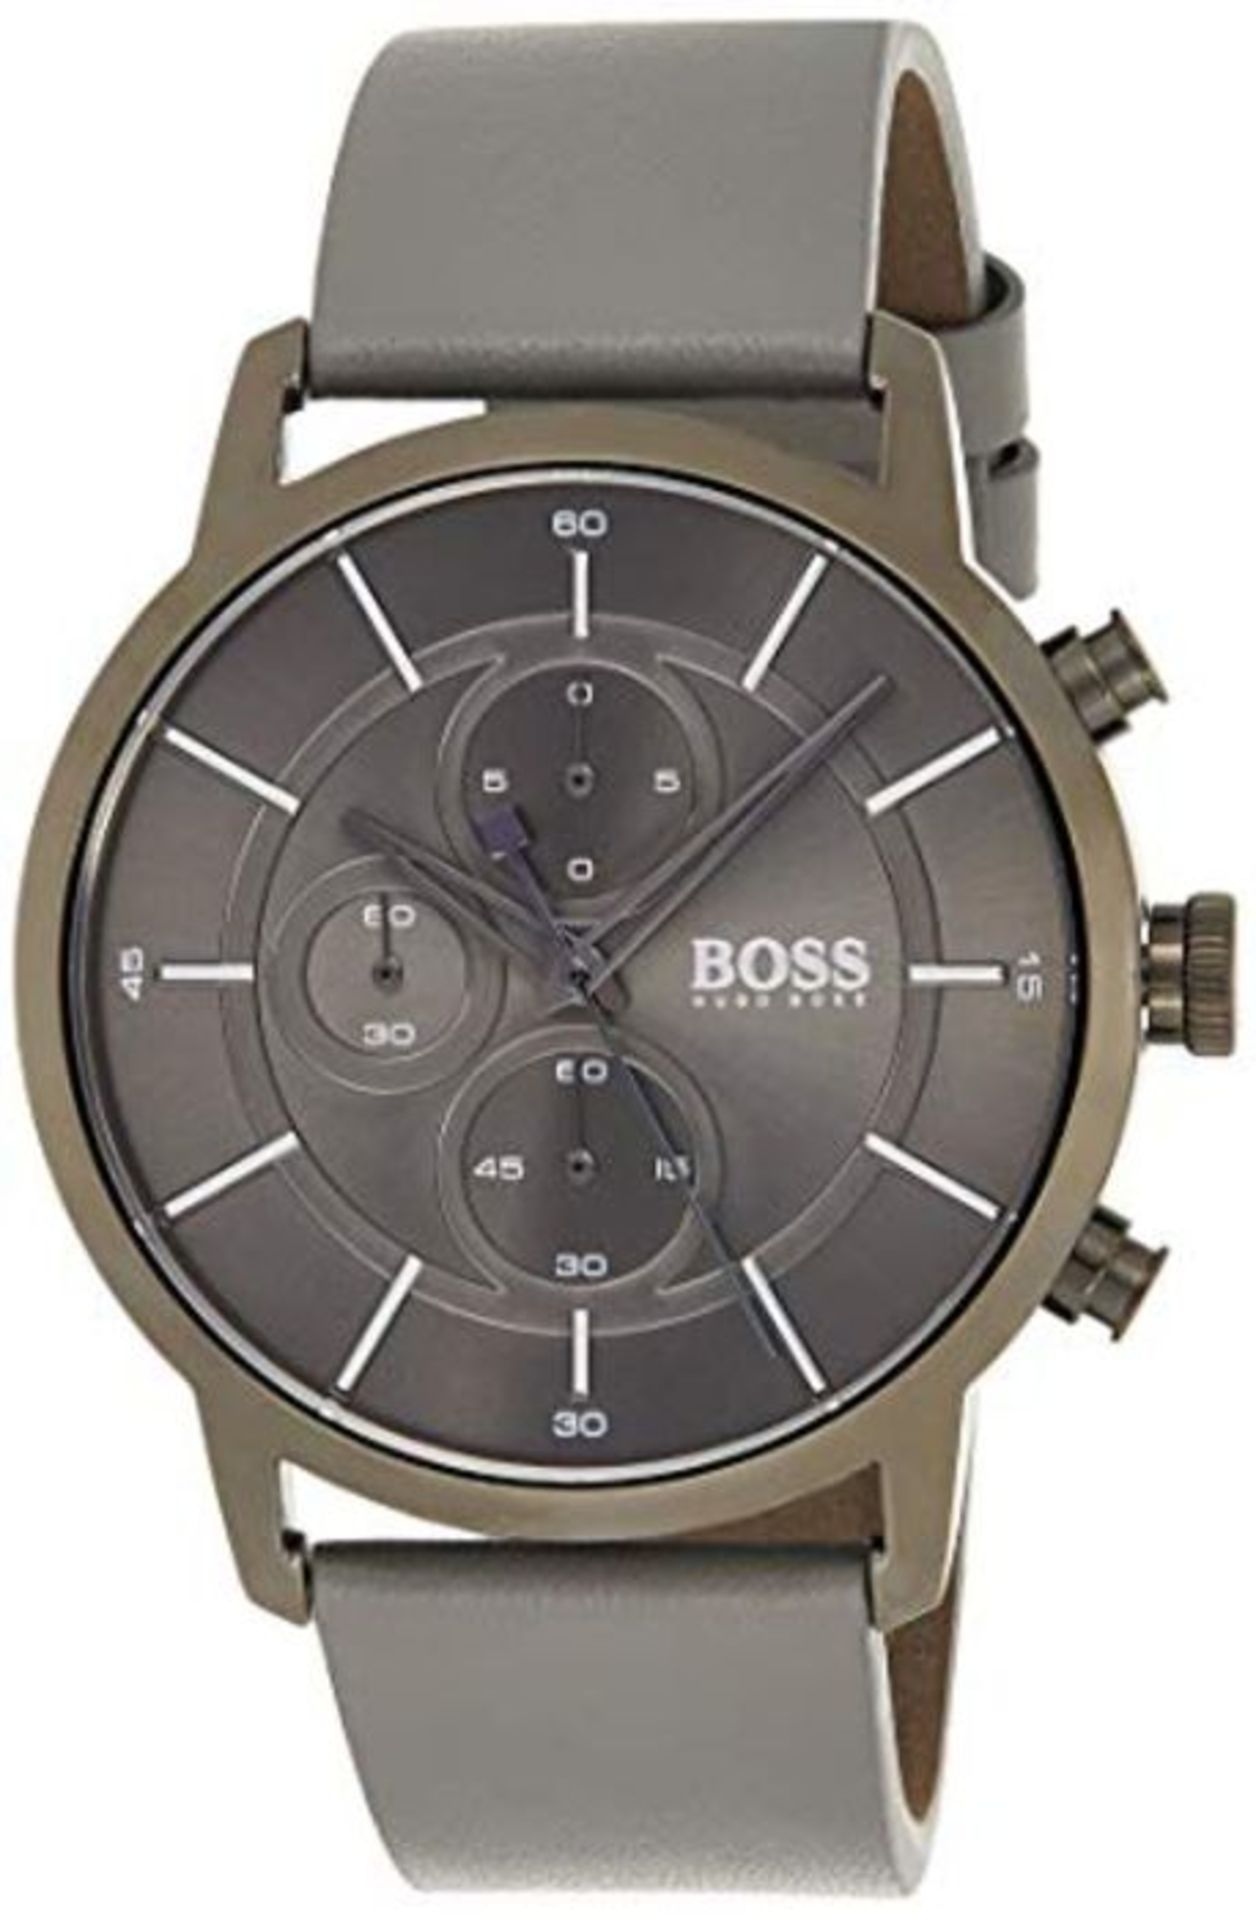 RRP £297.00 BOSS Unisex-Adult Chronograph Quartz Watch with Leather Strap 1513570